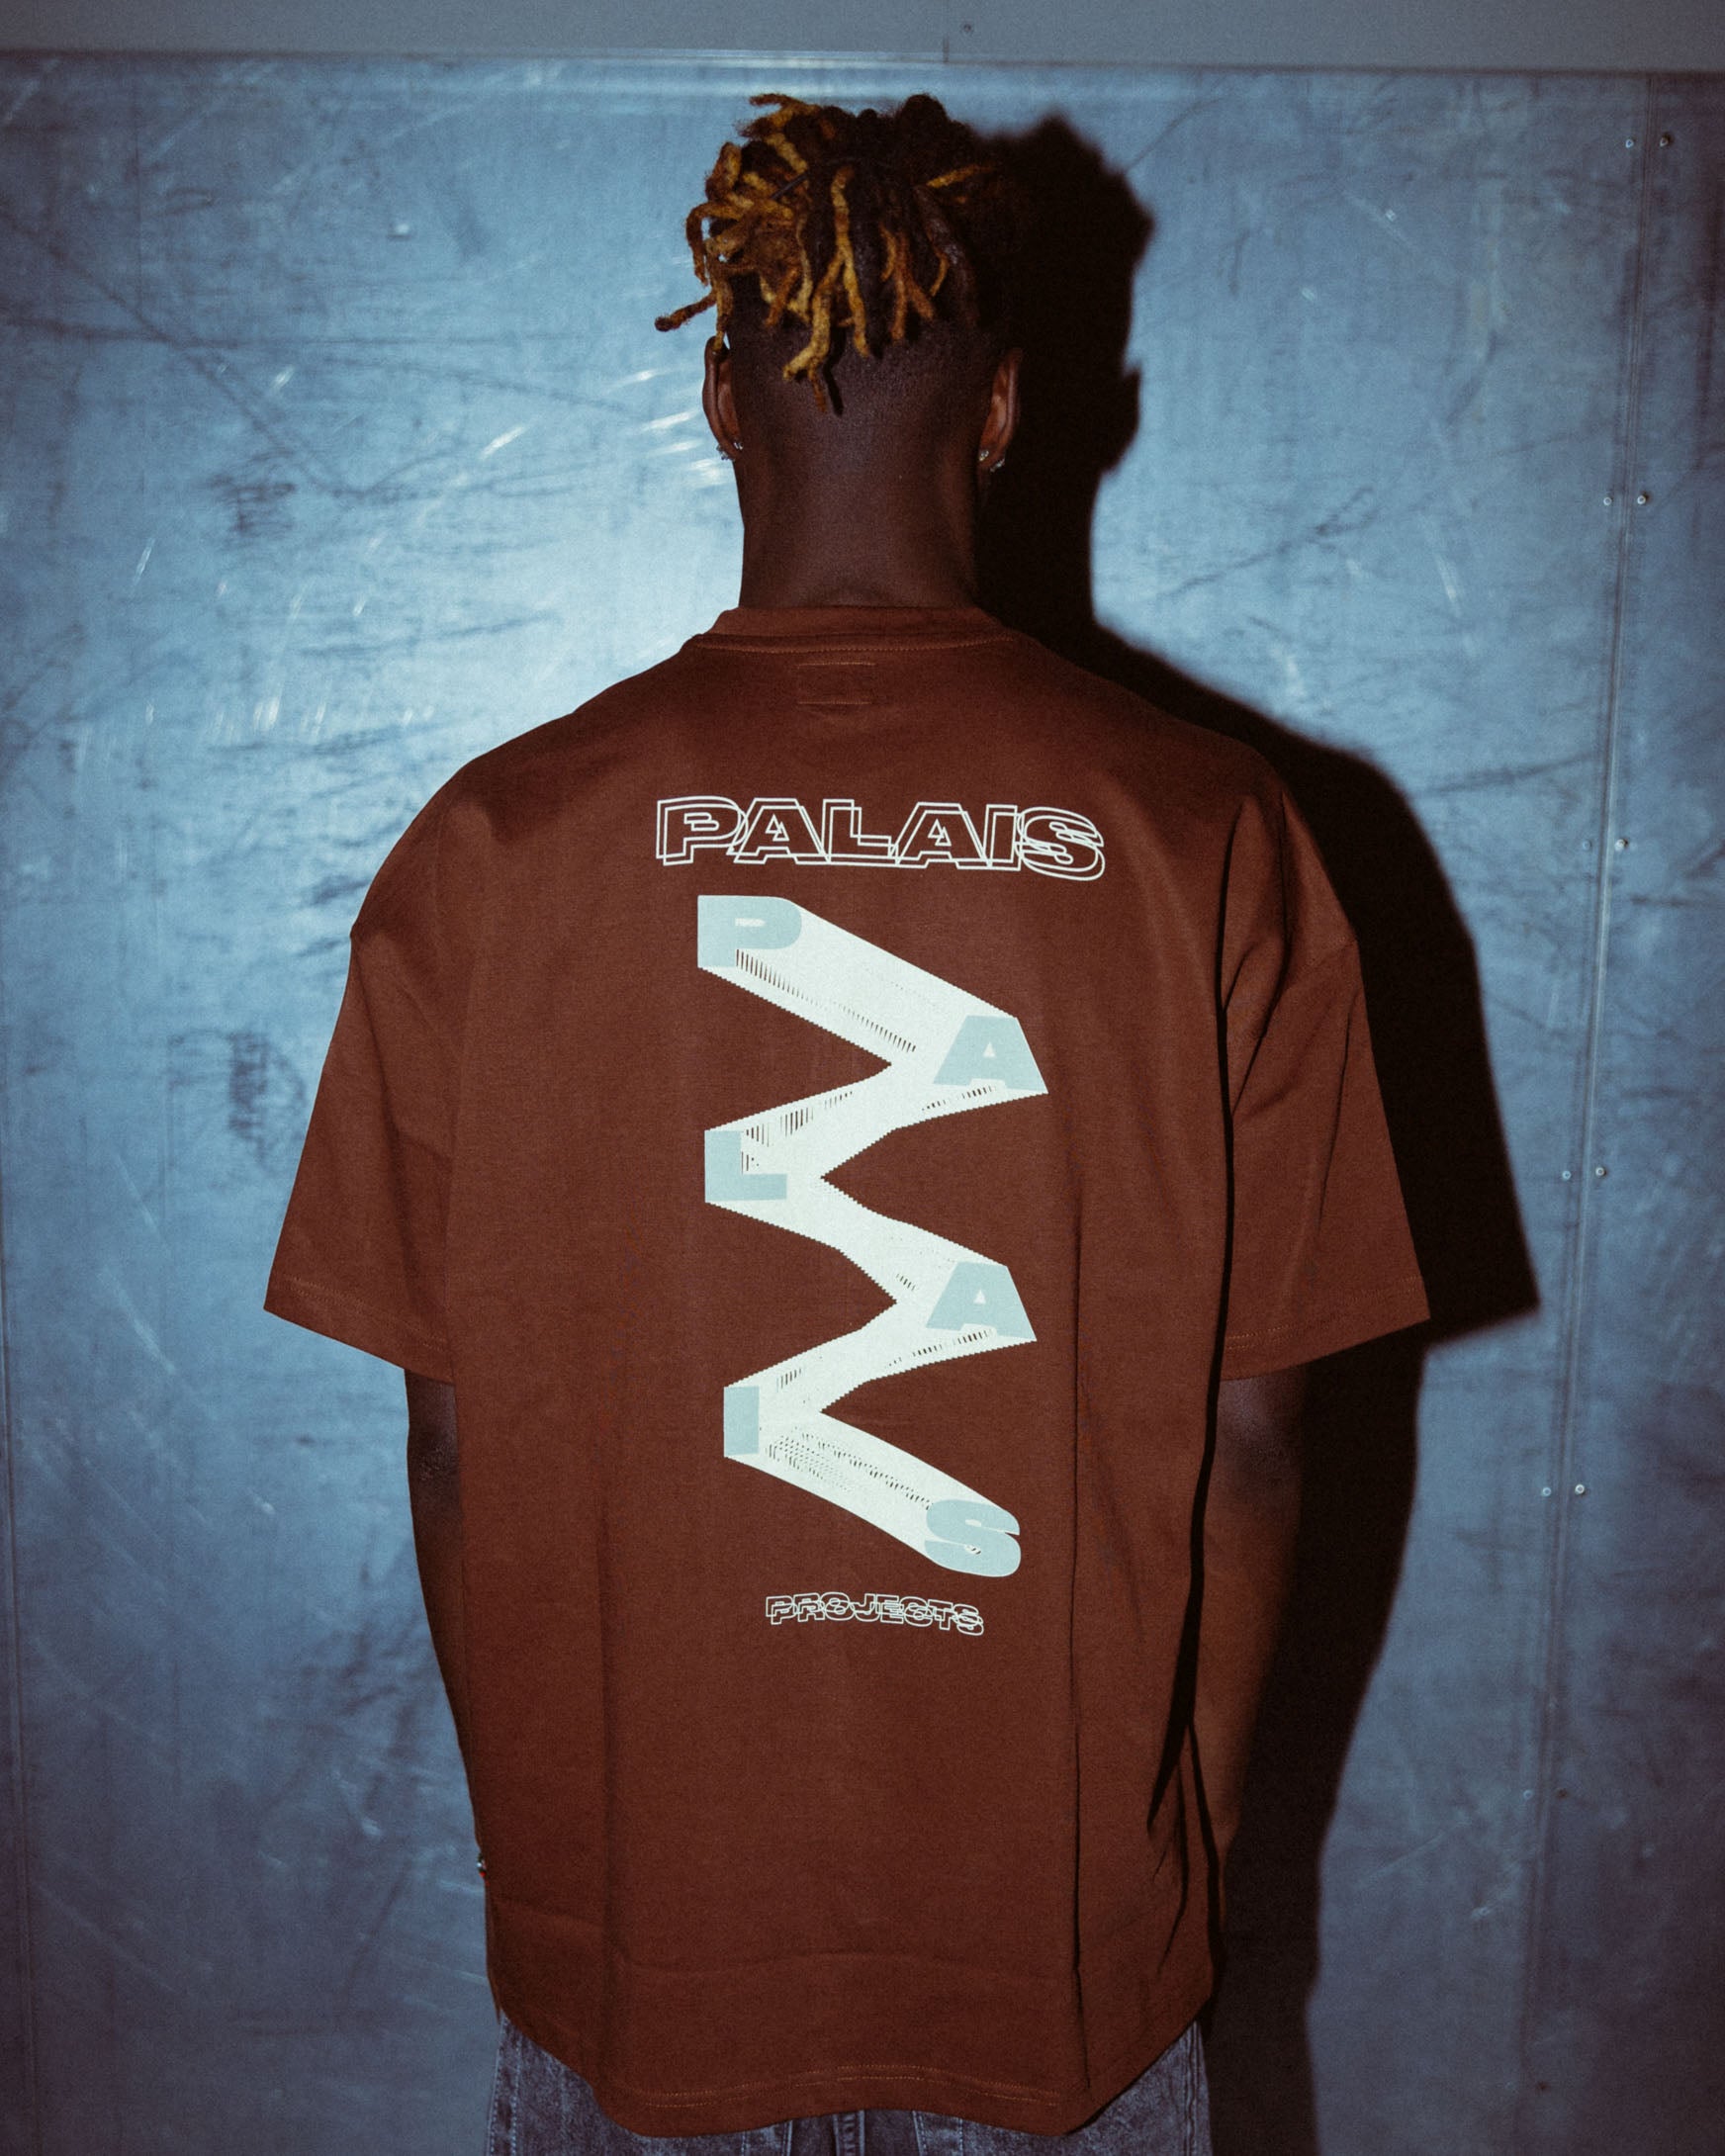 ZIGZAG TEE – Palais Projects